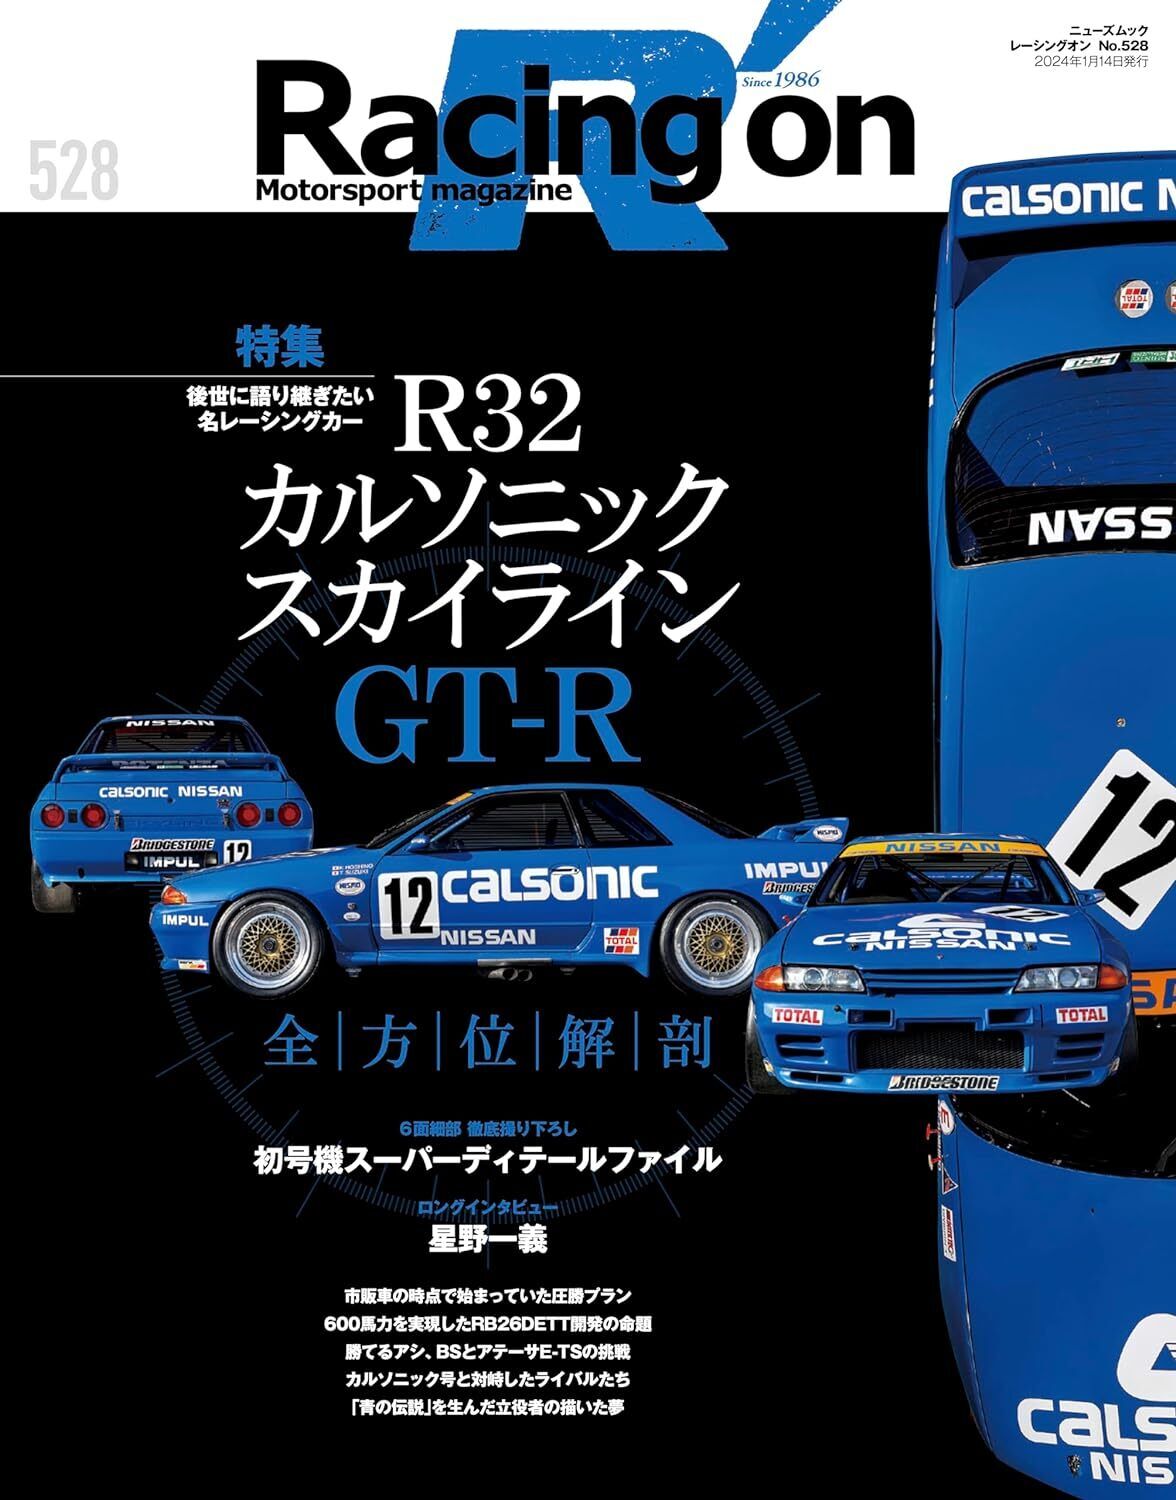 Racing on No.528 Japanese book NISSAN R32 Calsonic Skyline GT-R New